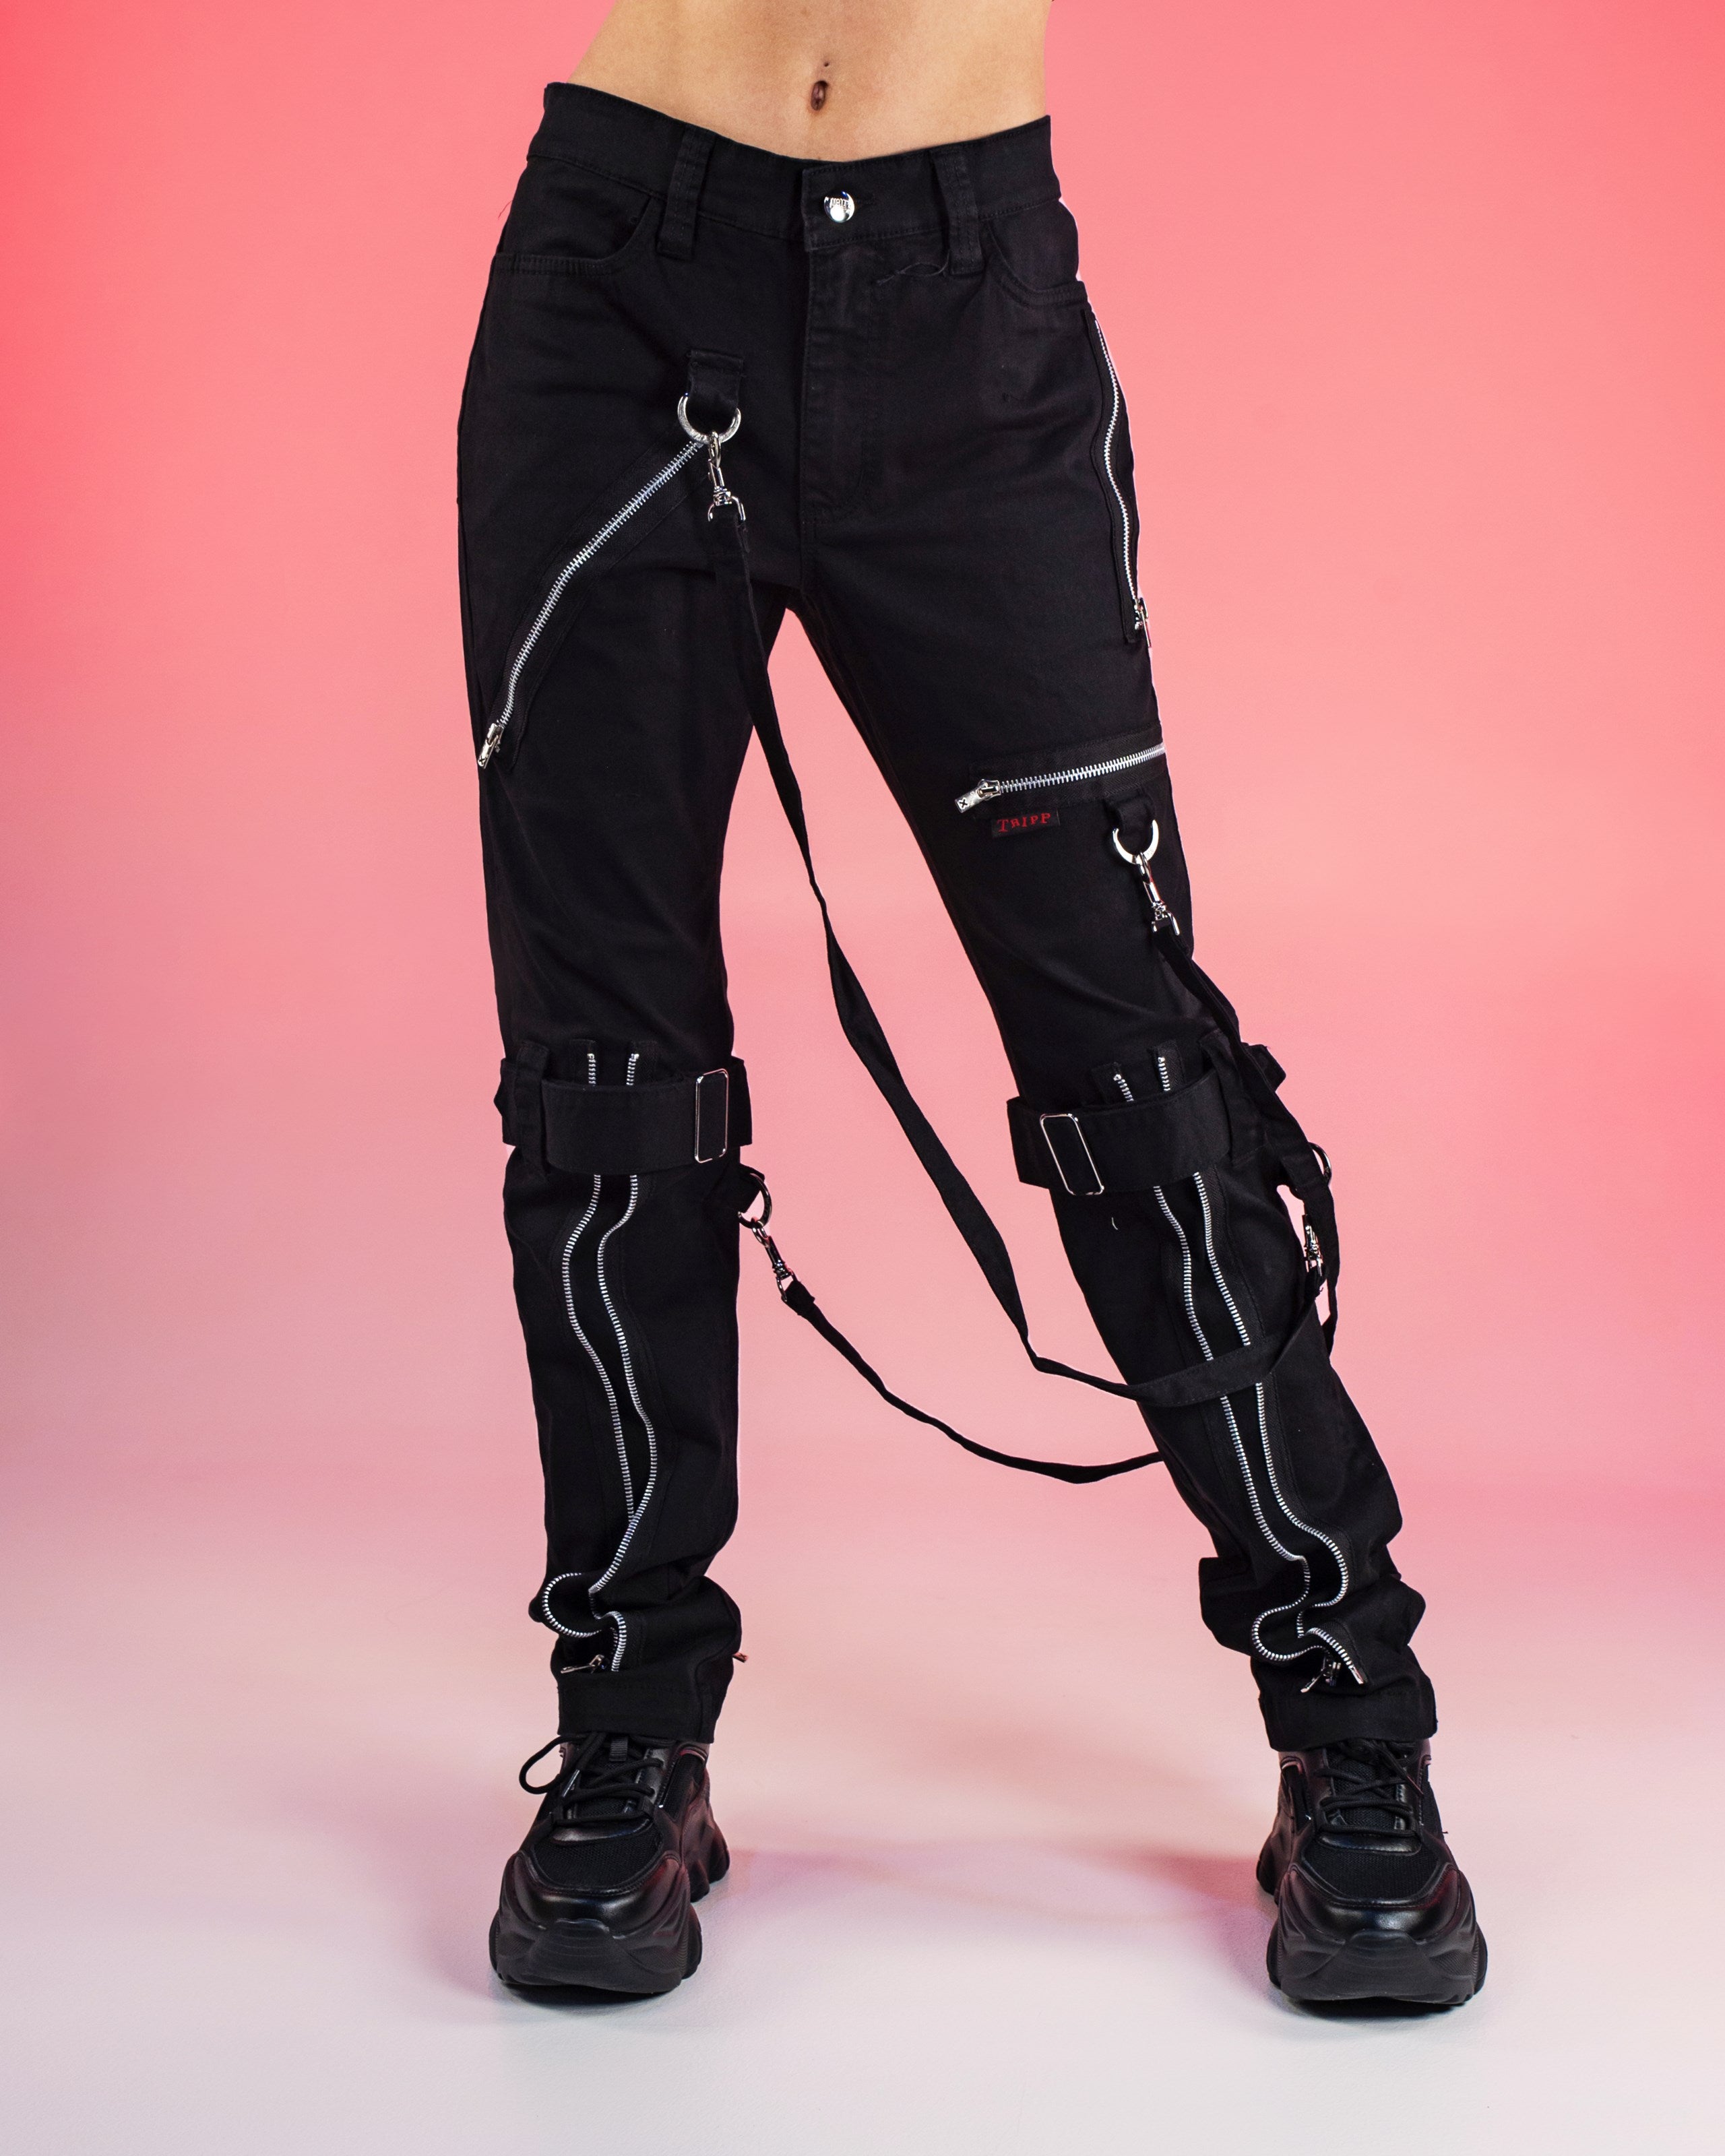 Gothic Tripp Pants In Womens Pants for sale  eBay